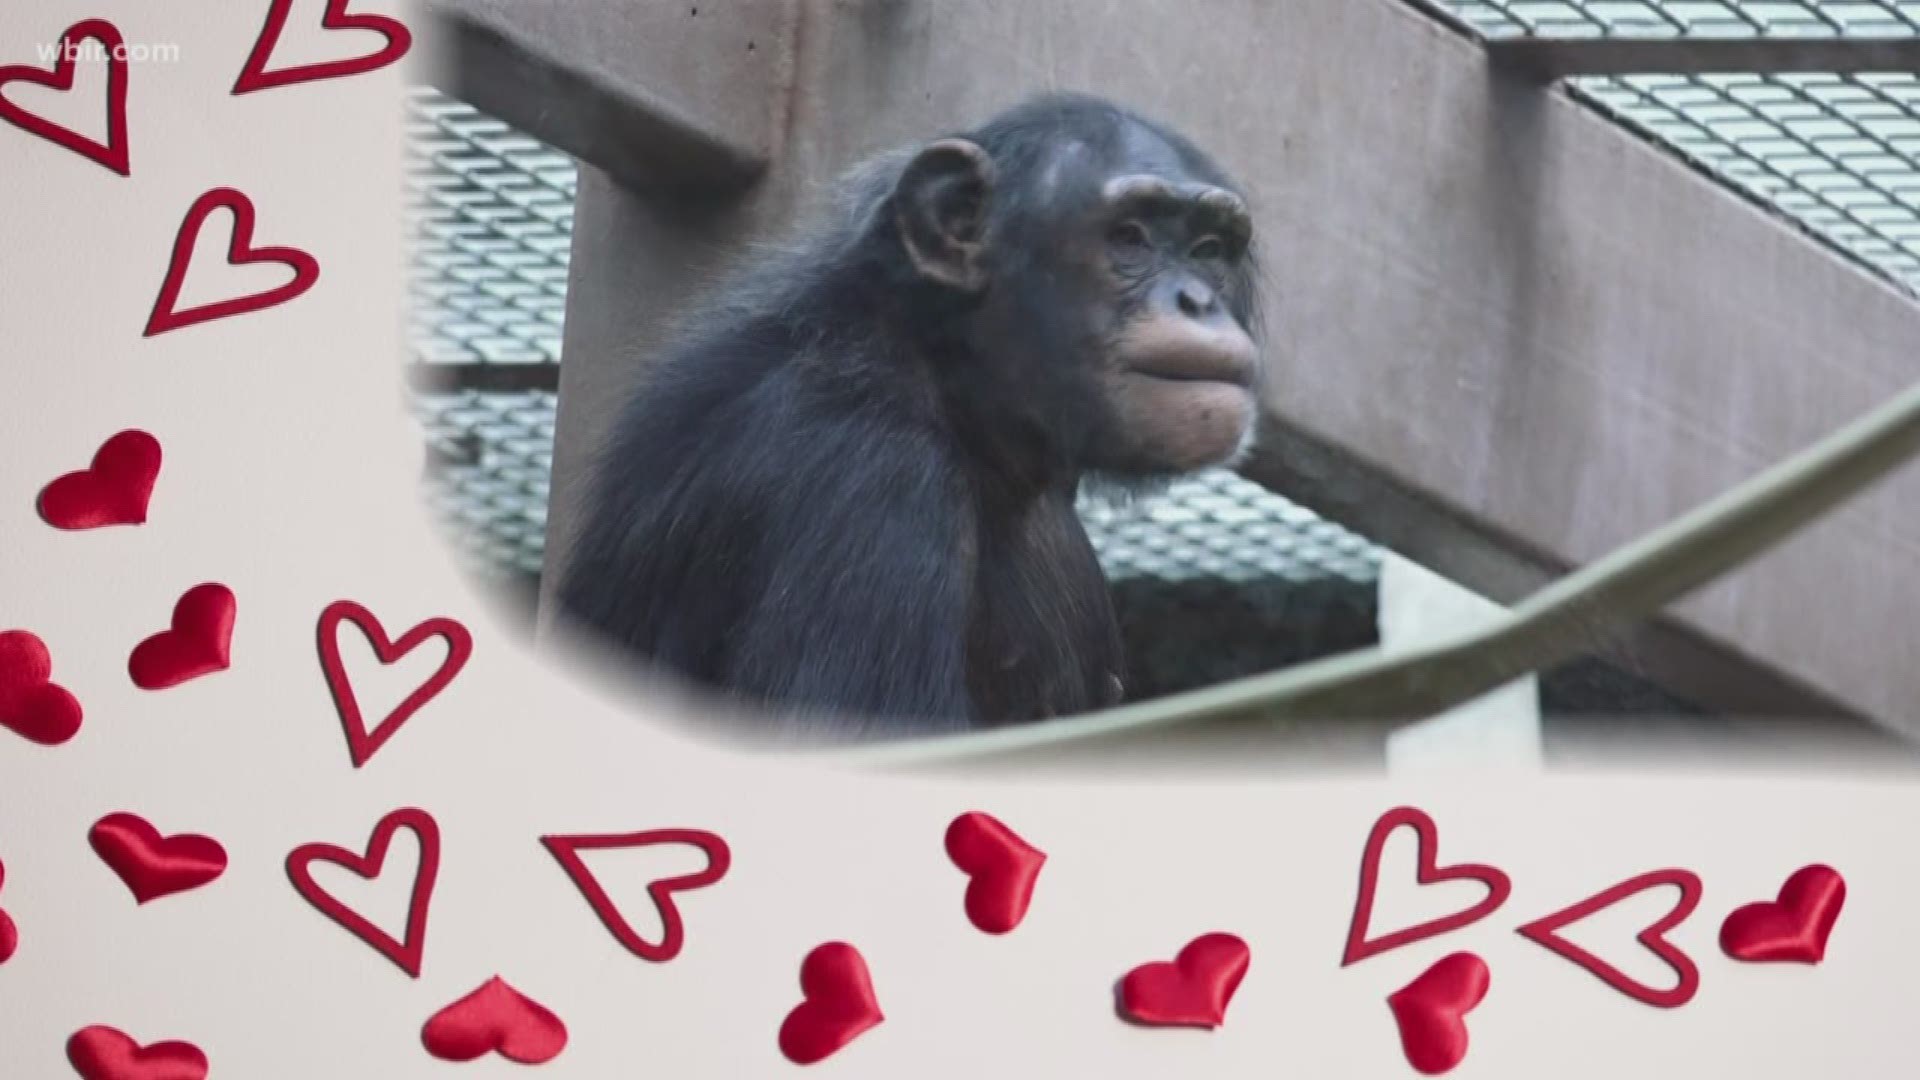 There is an interesting romance budding at Zoo Knoxville. The zoo's most eligible bachelorette is hoping to find her forever love just in time for Valentines Day.